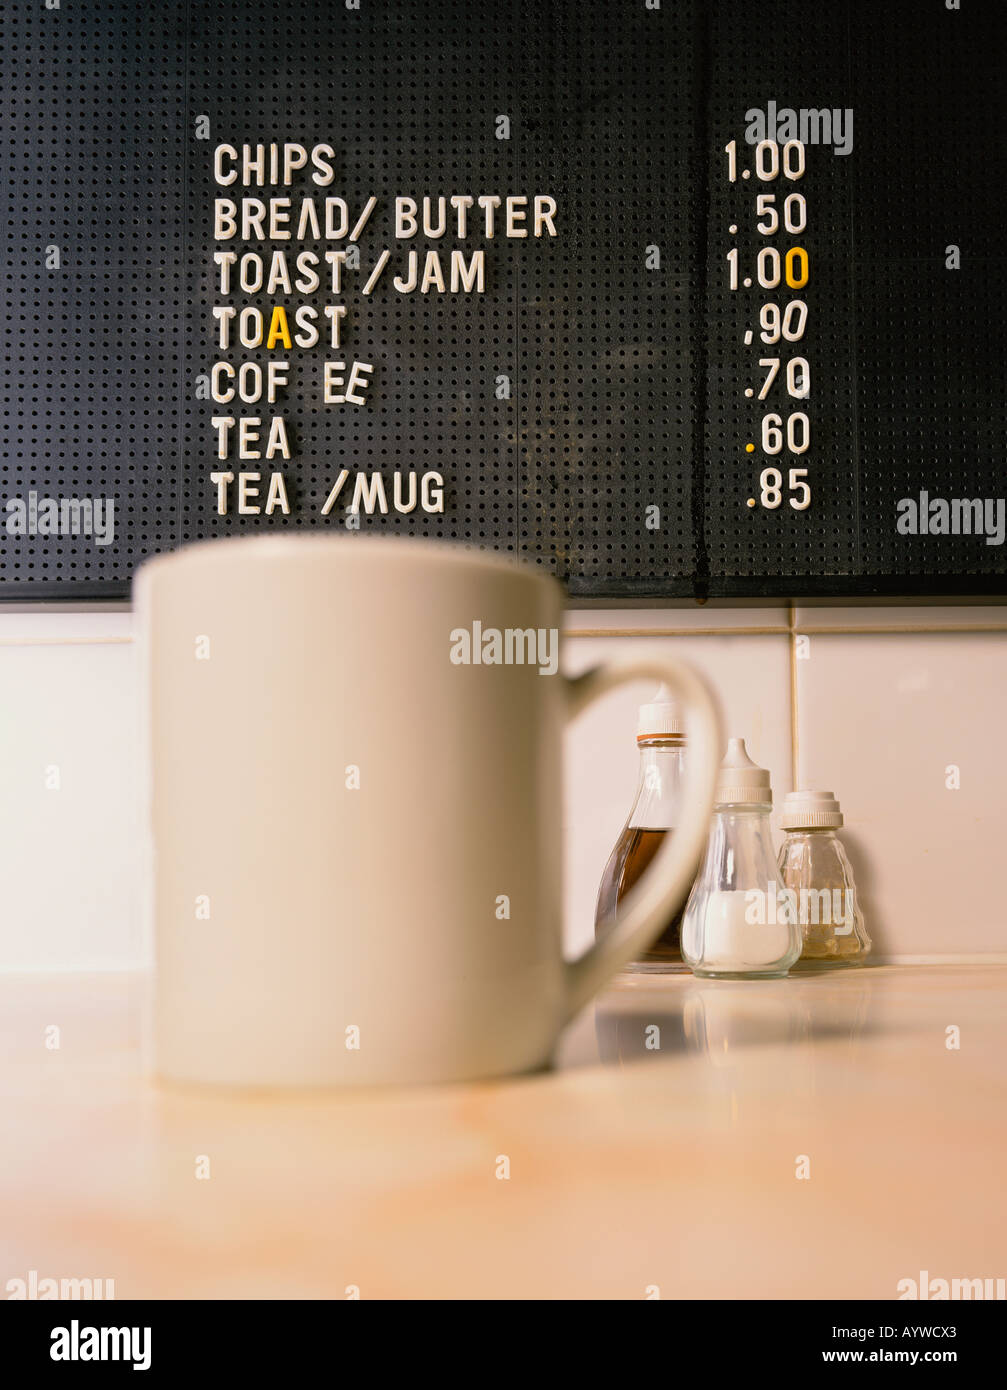 A close up of a mug in a typically British cafe scene Stock Photo